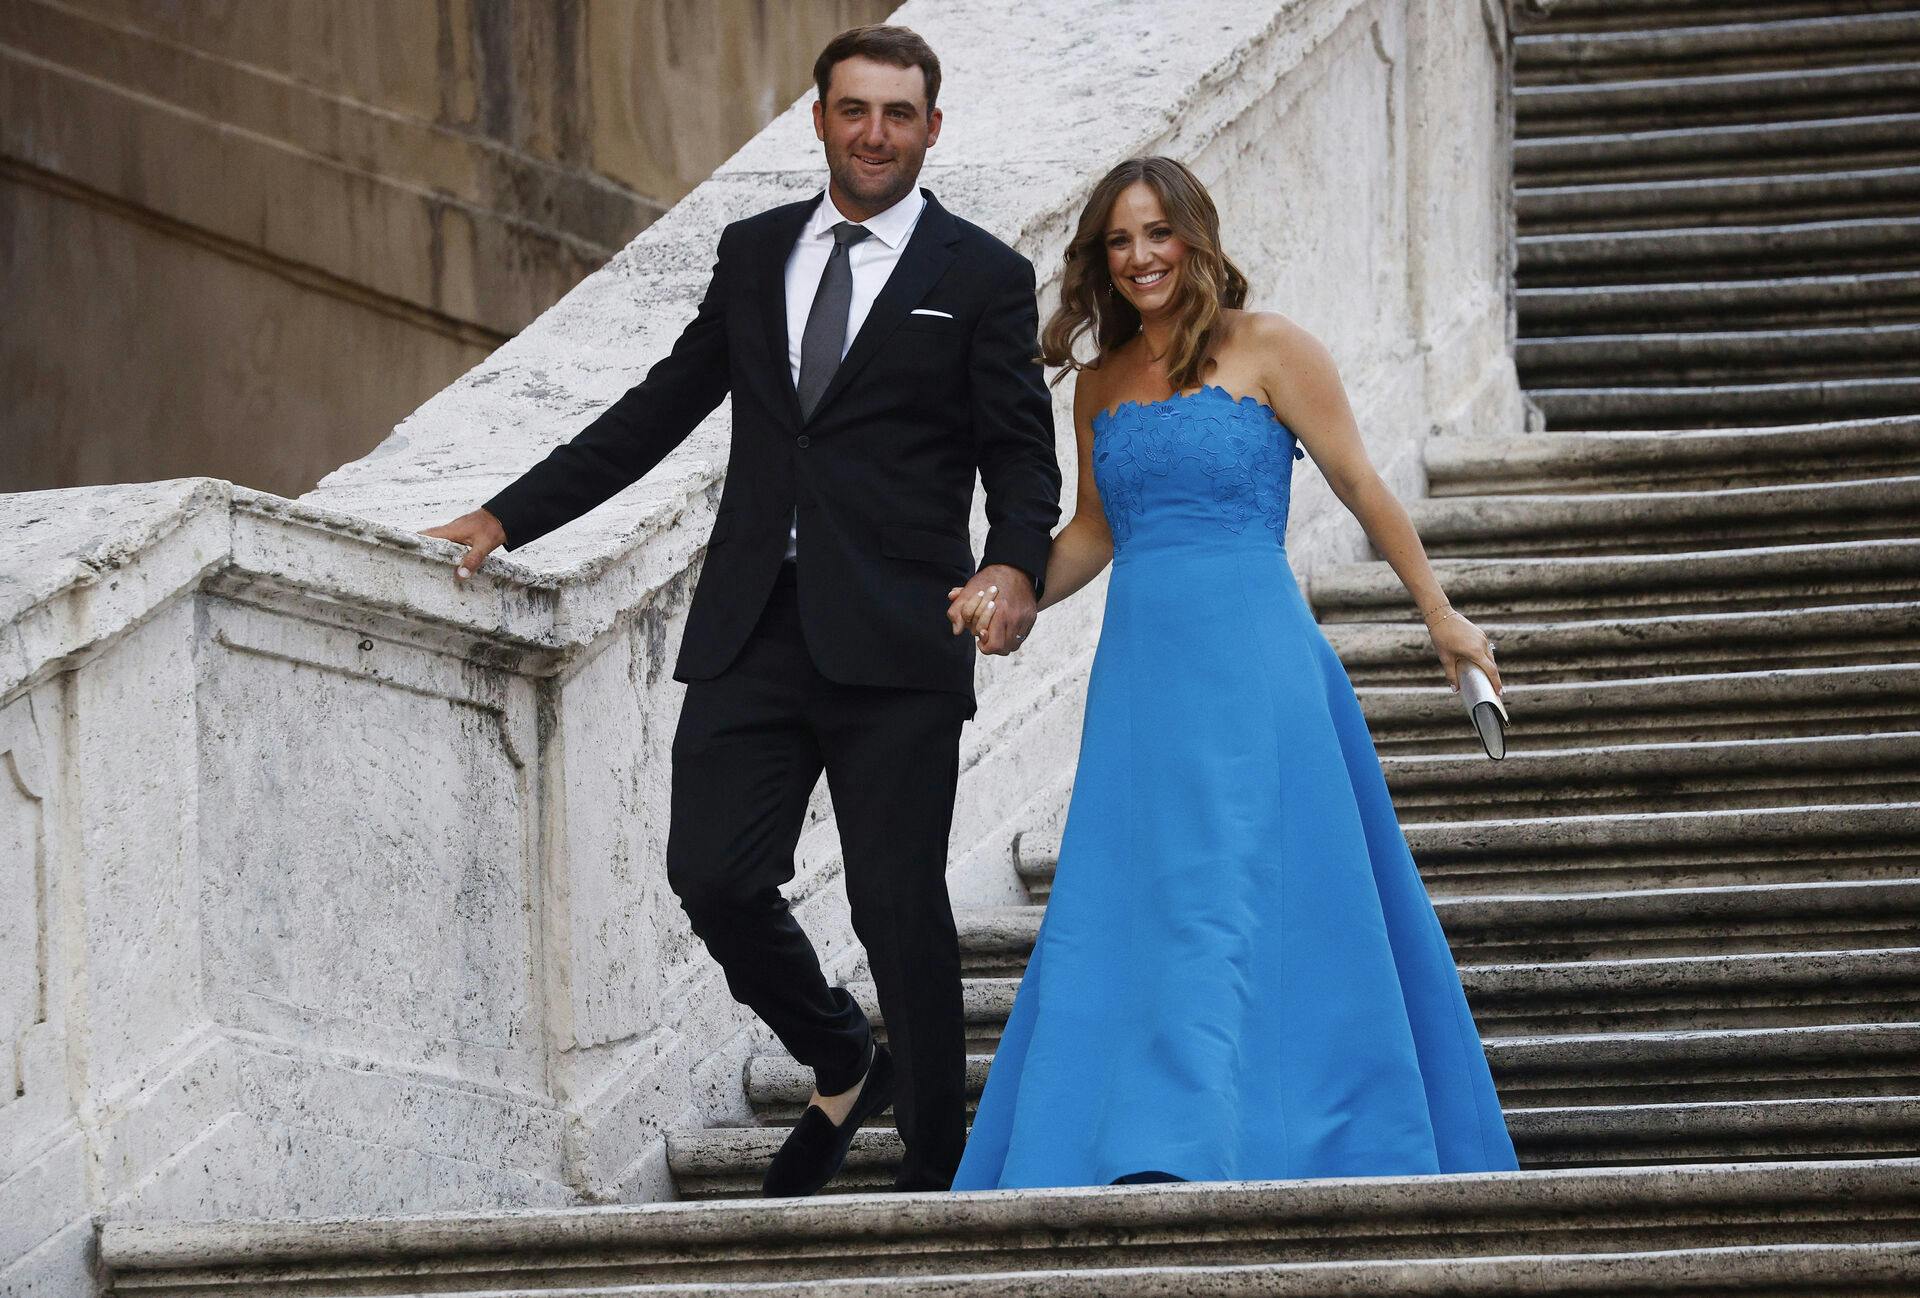 Golf - The 2023 Ryder Cup - Rome, Italy - September 27, 2023 Team USA's Scottie Scheffler and his wife Meredith Scheffler are pictured on the Spanish steps and stairs at Piazza di Spagna in Rome REUTERS/Guglielmo Mangiapane